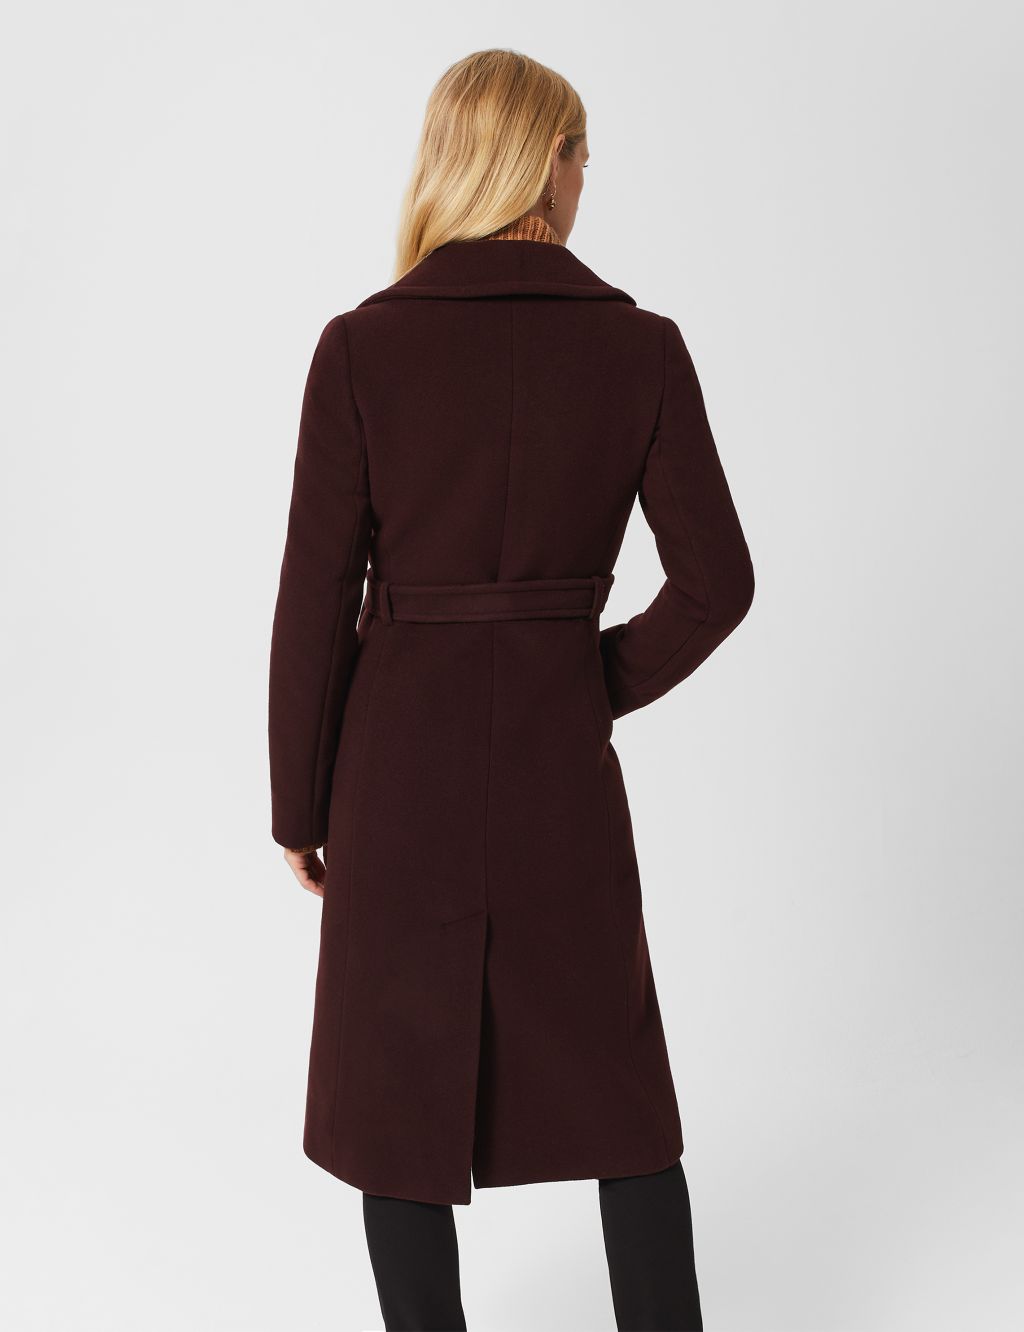 Wool Rich Collared Wrap Coat image 3